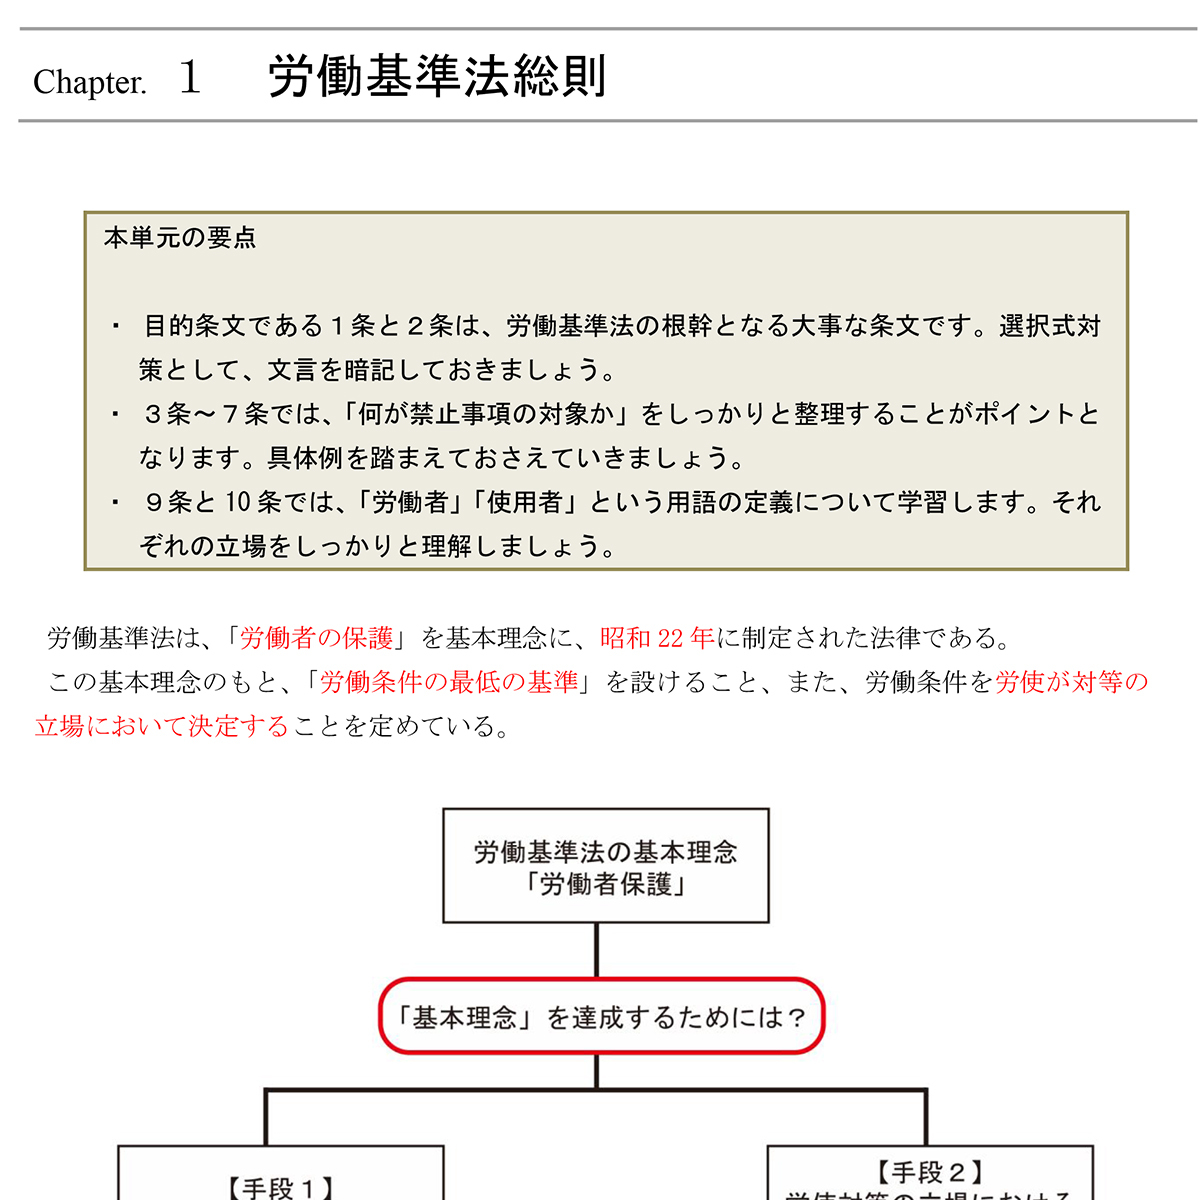  regular price approximately 8 ten thousand jpy!2023 licensed social insurance consultant ( Labor and Social Security Attorney ) examination DVD course 37 pieces set * new goods * lack of none * text attaching (PDF)* You can ucan.. low price!